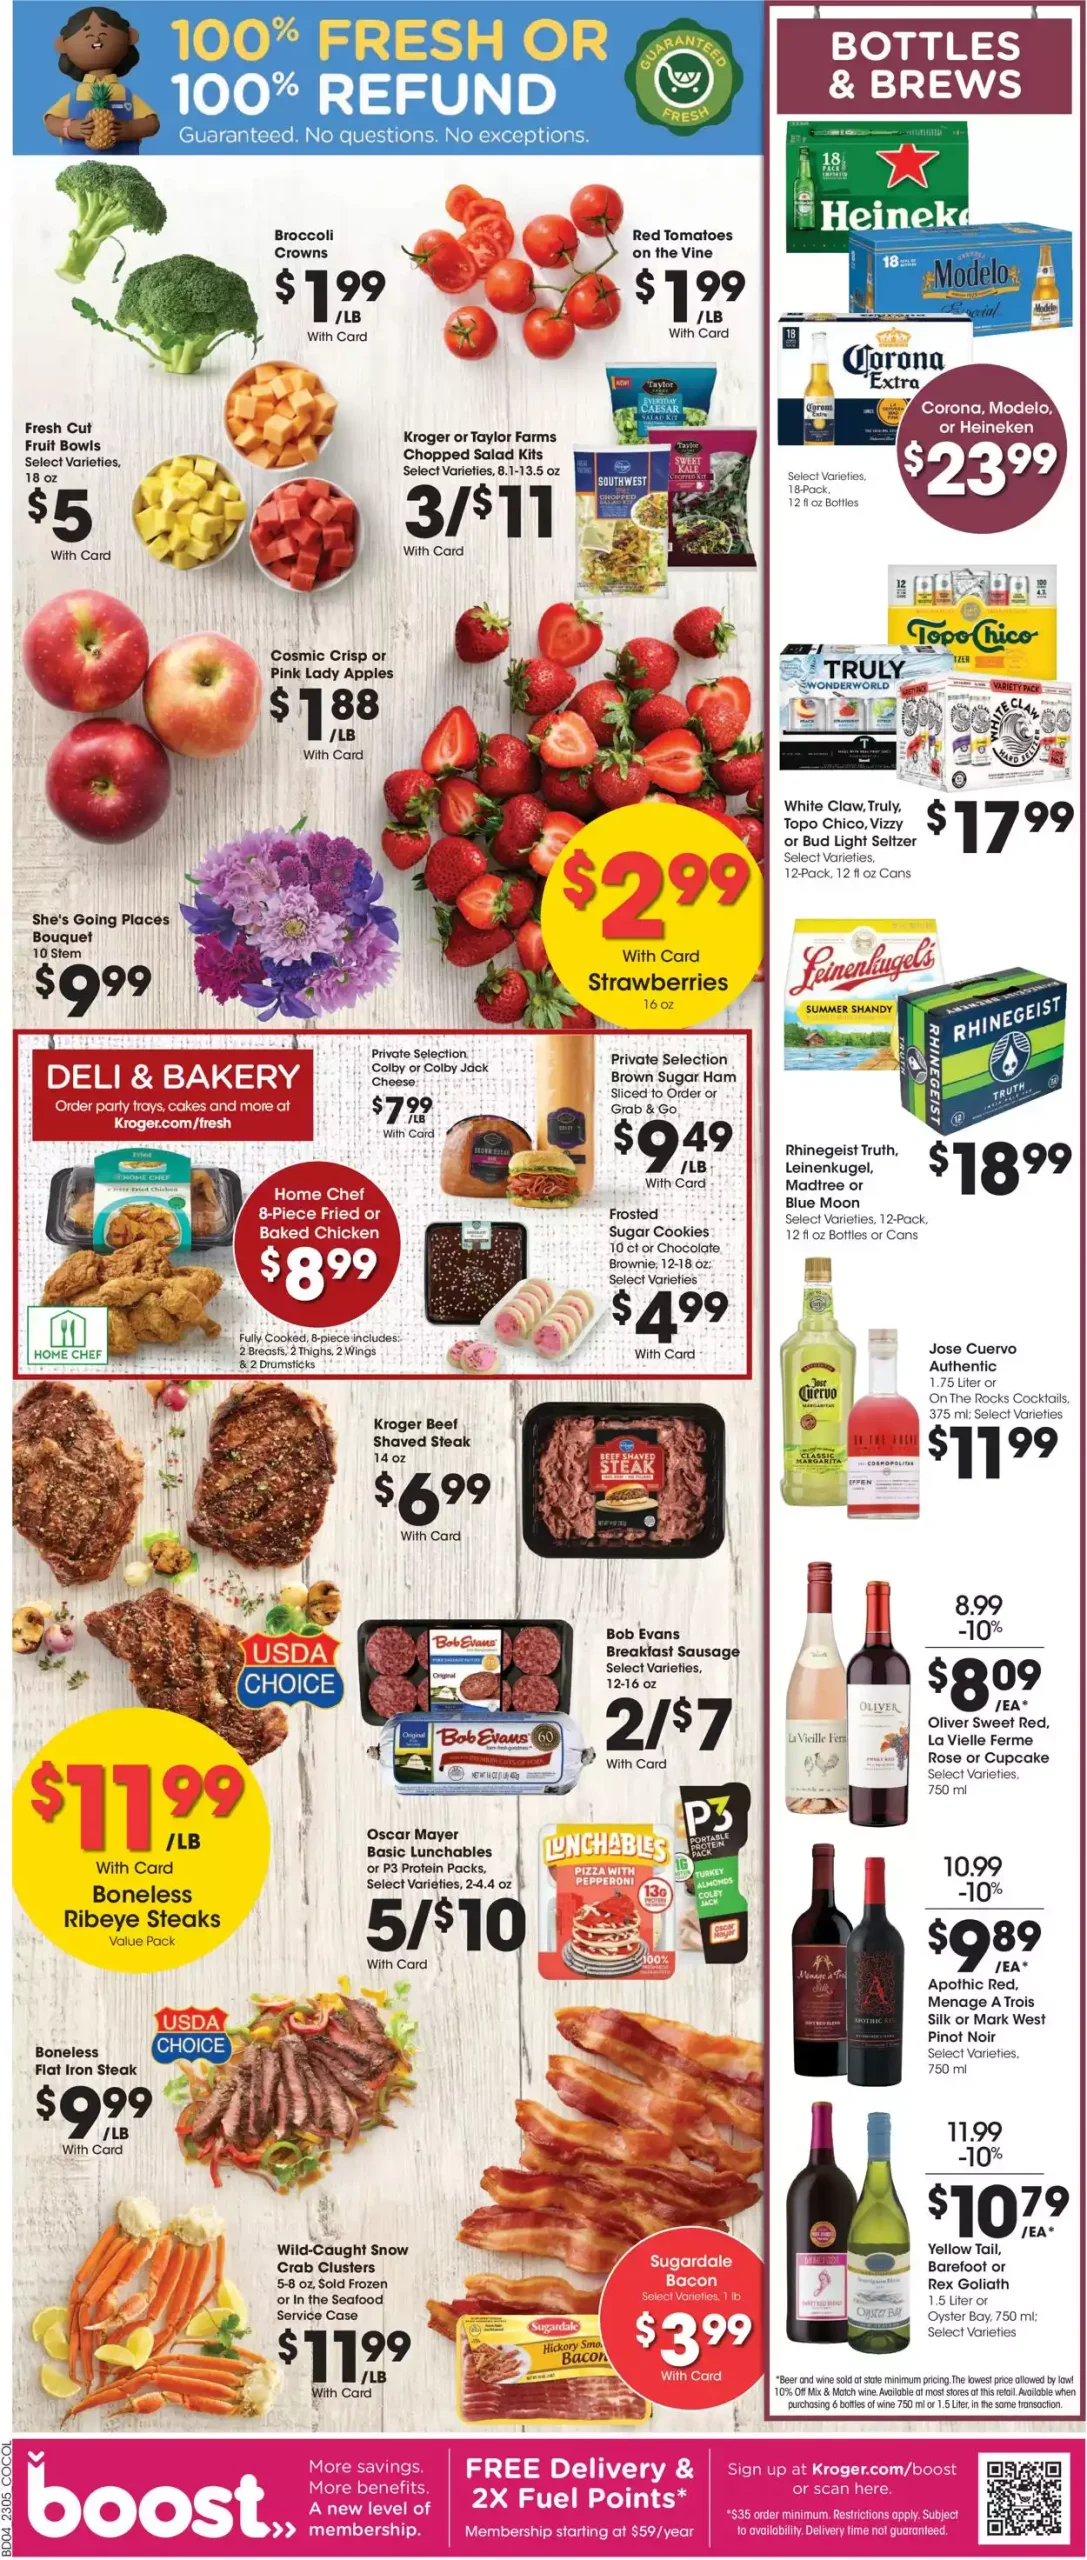 Kroger Weekly Ad Preview March 22 - 28, 2023 6